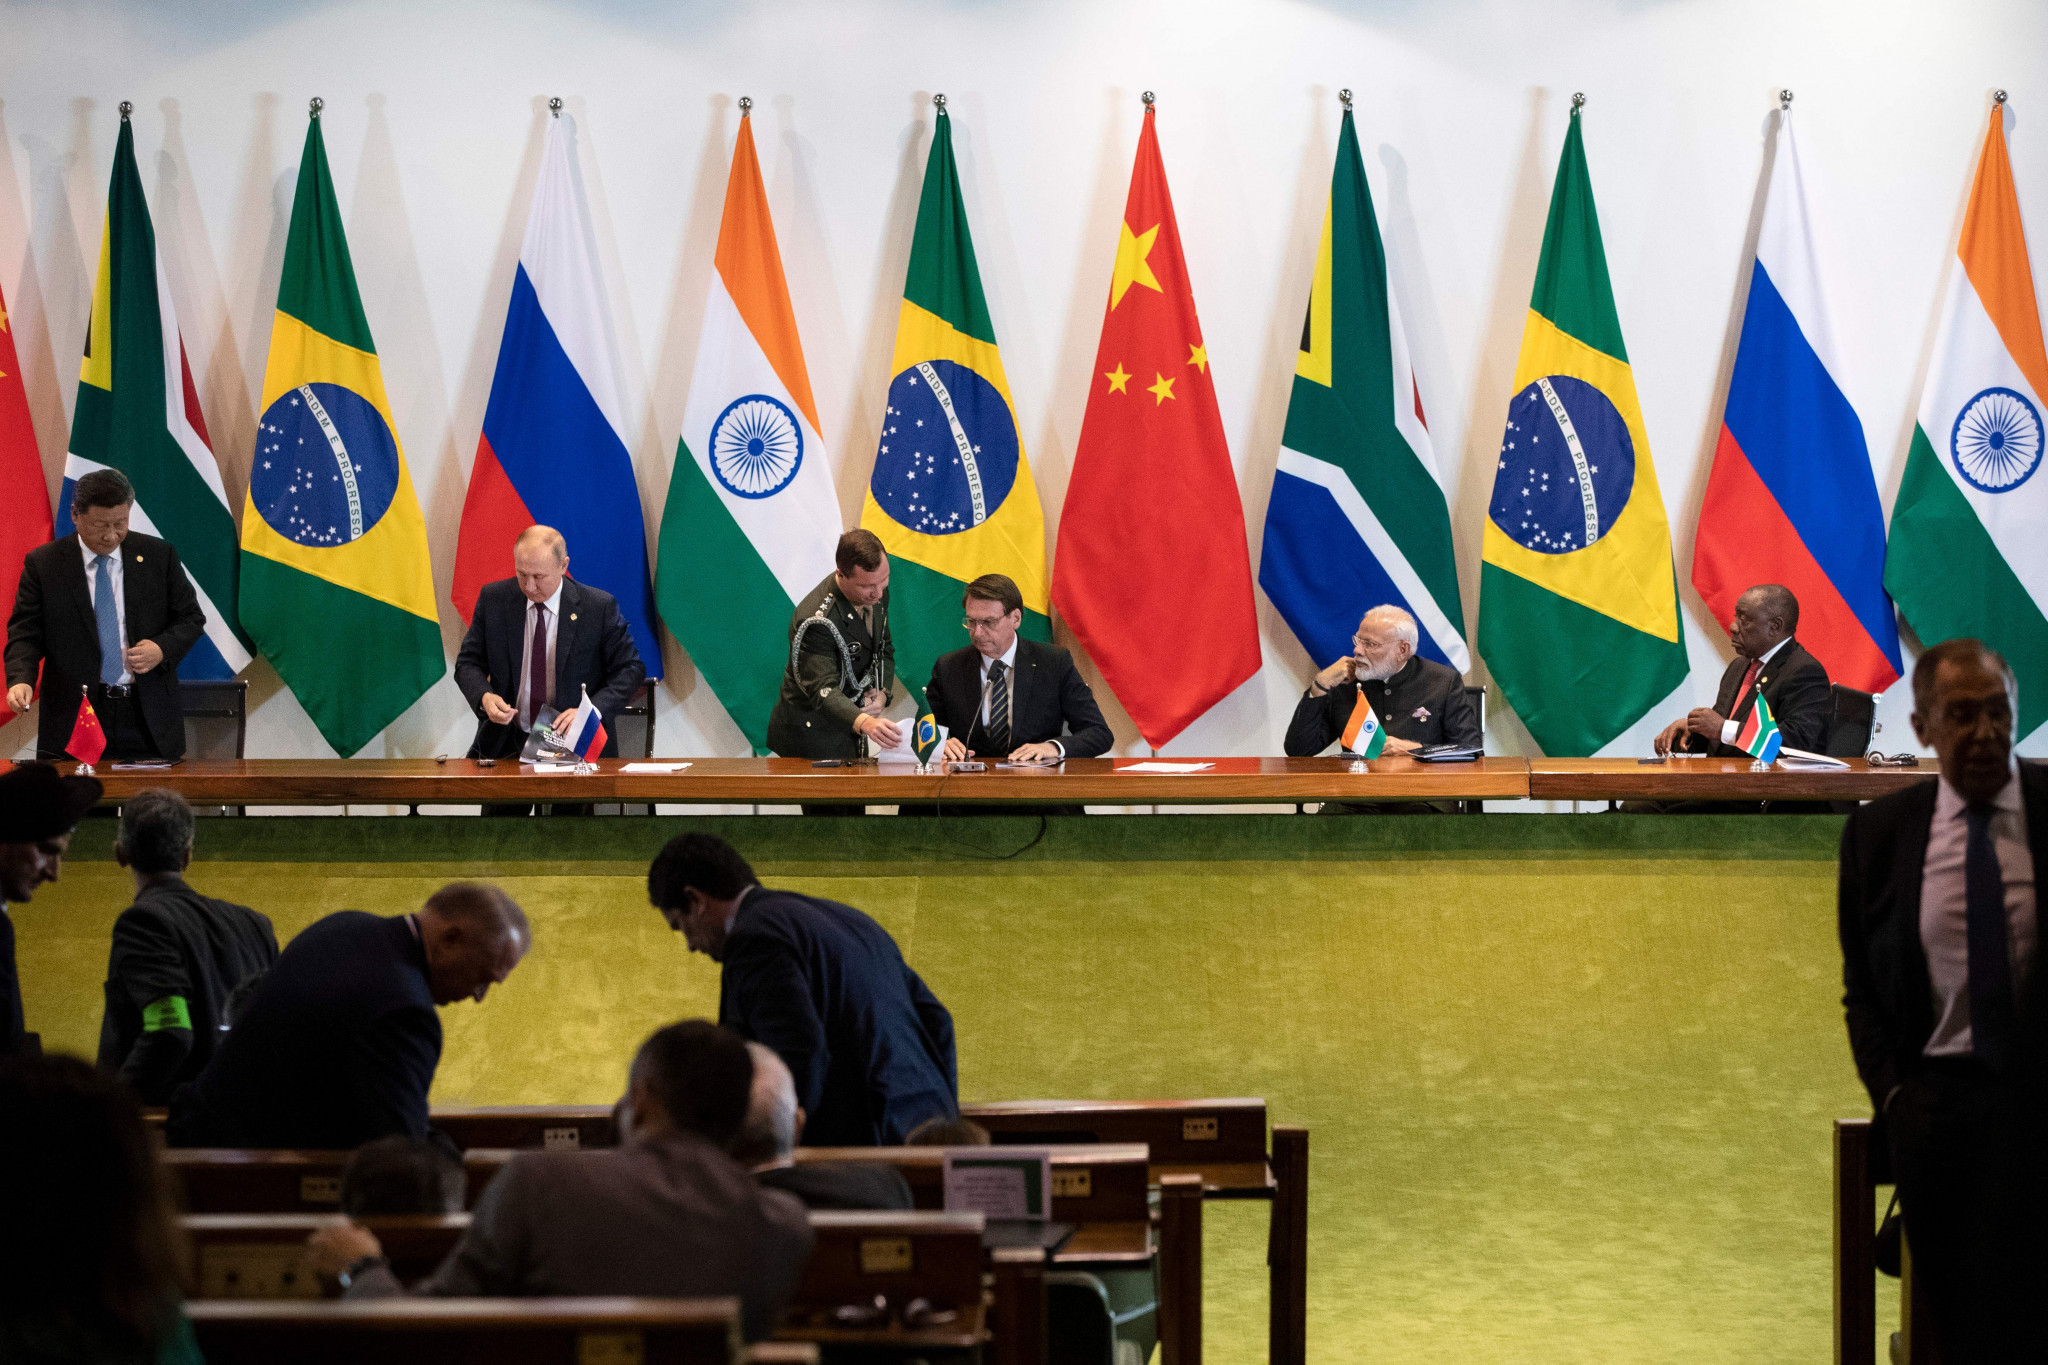 Russia is a member of the international BRICS group which also includes Brazil, India, China and South Africa ©Getty Images